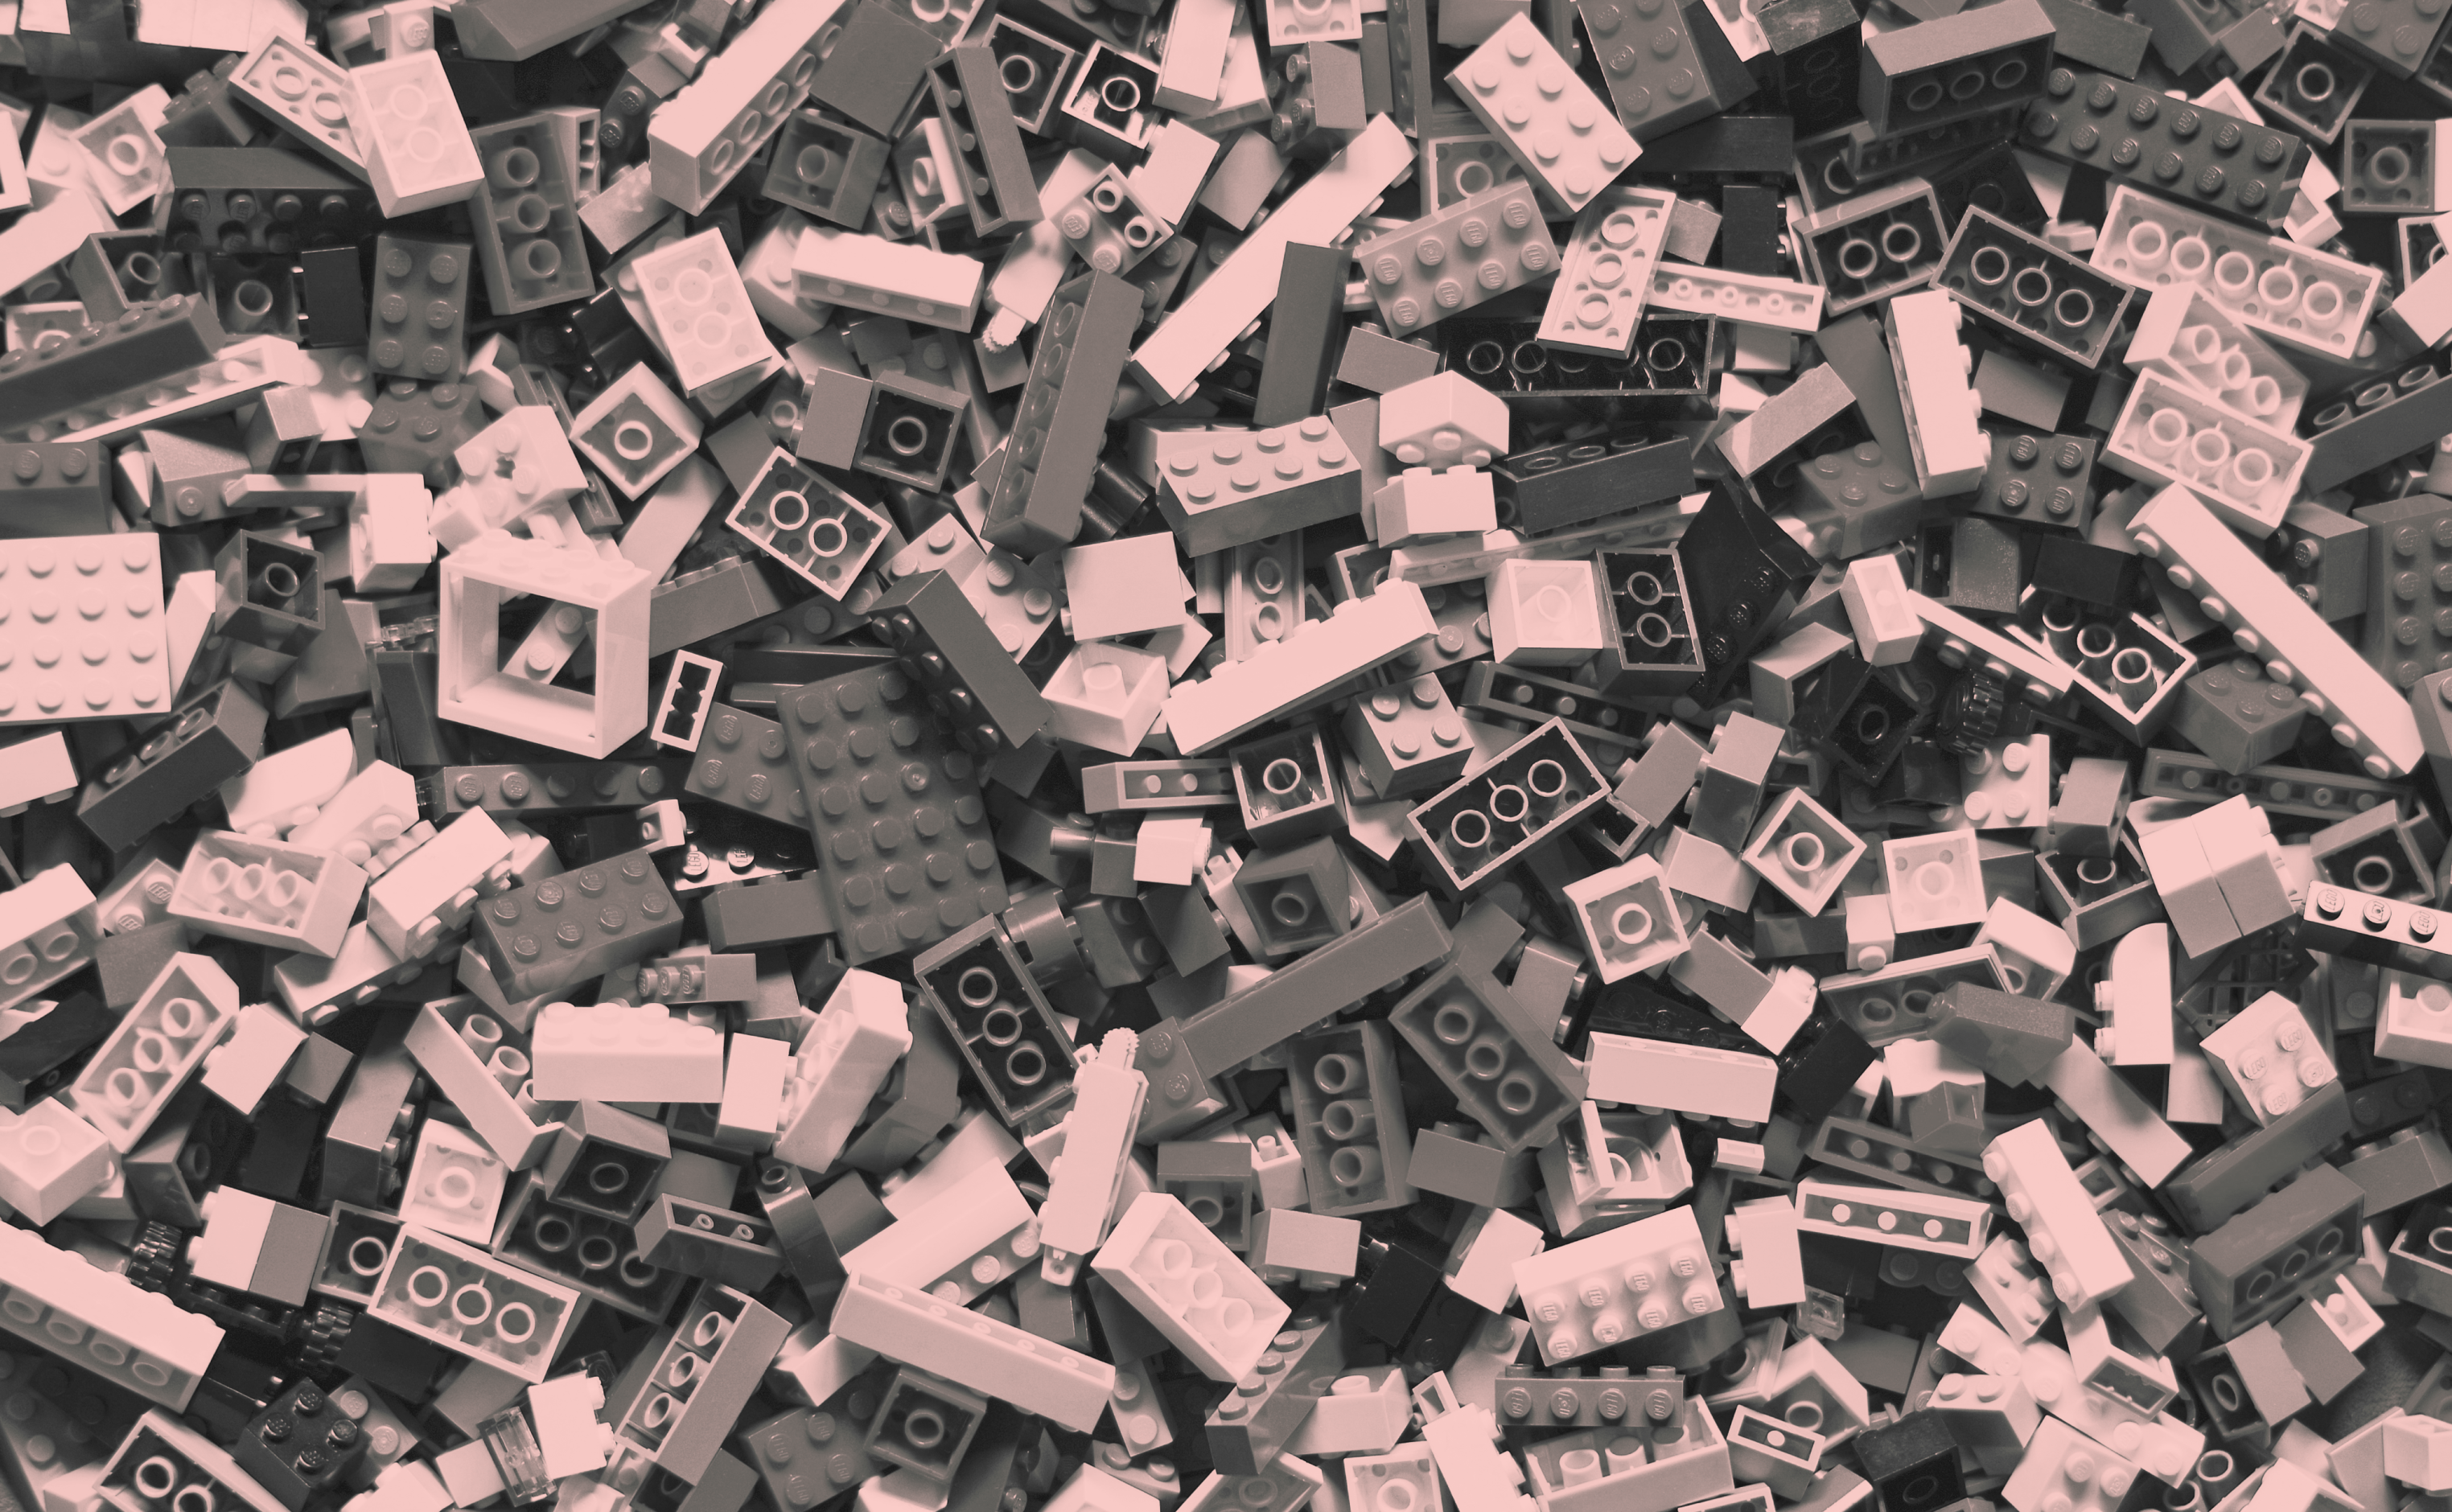 Many lego pieces piled on top of each other of varying sizes with a pinkish hue overlay